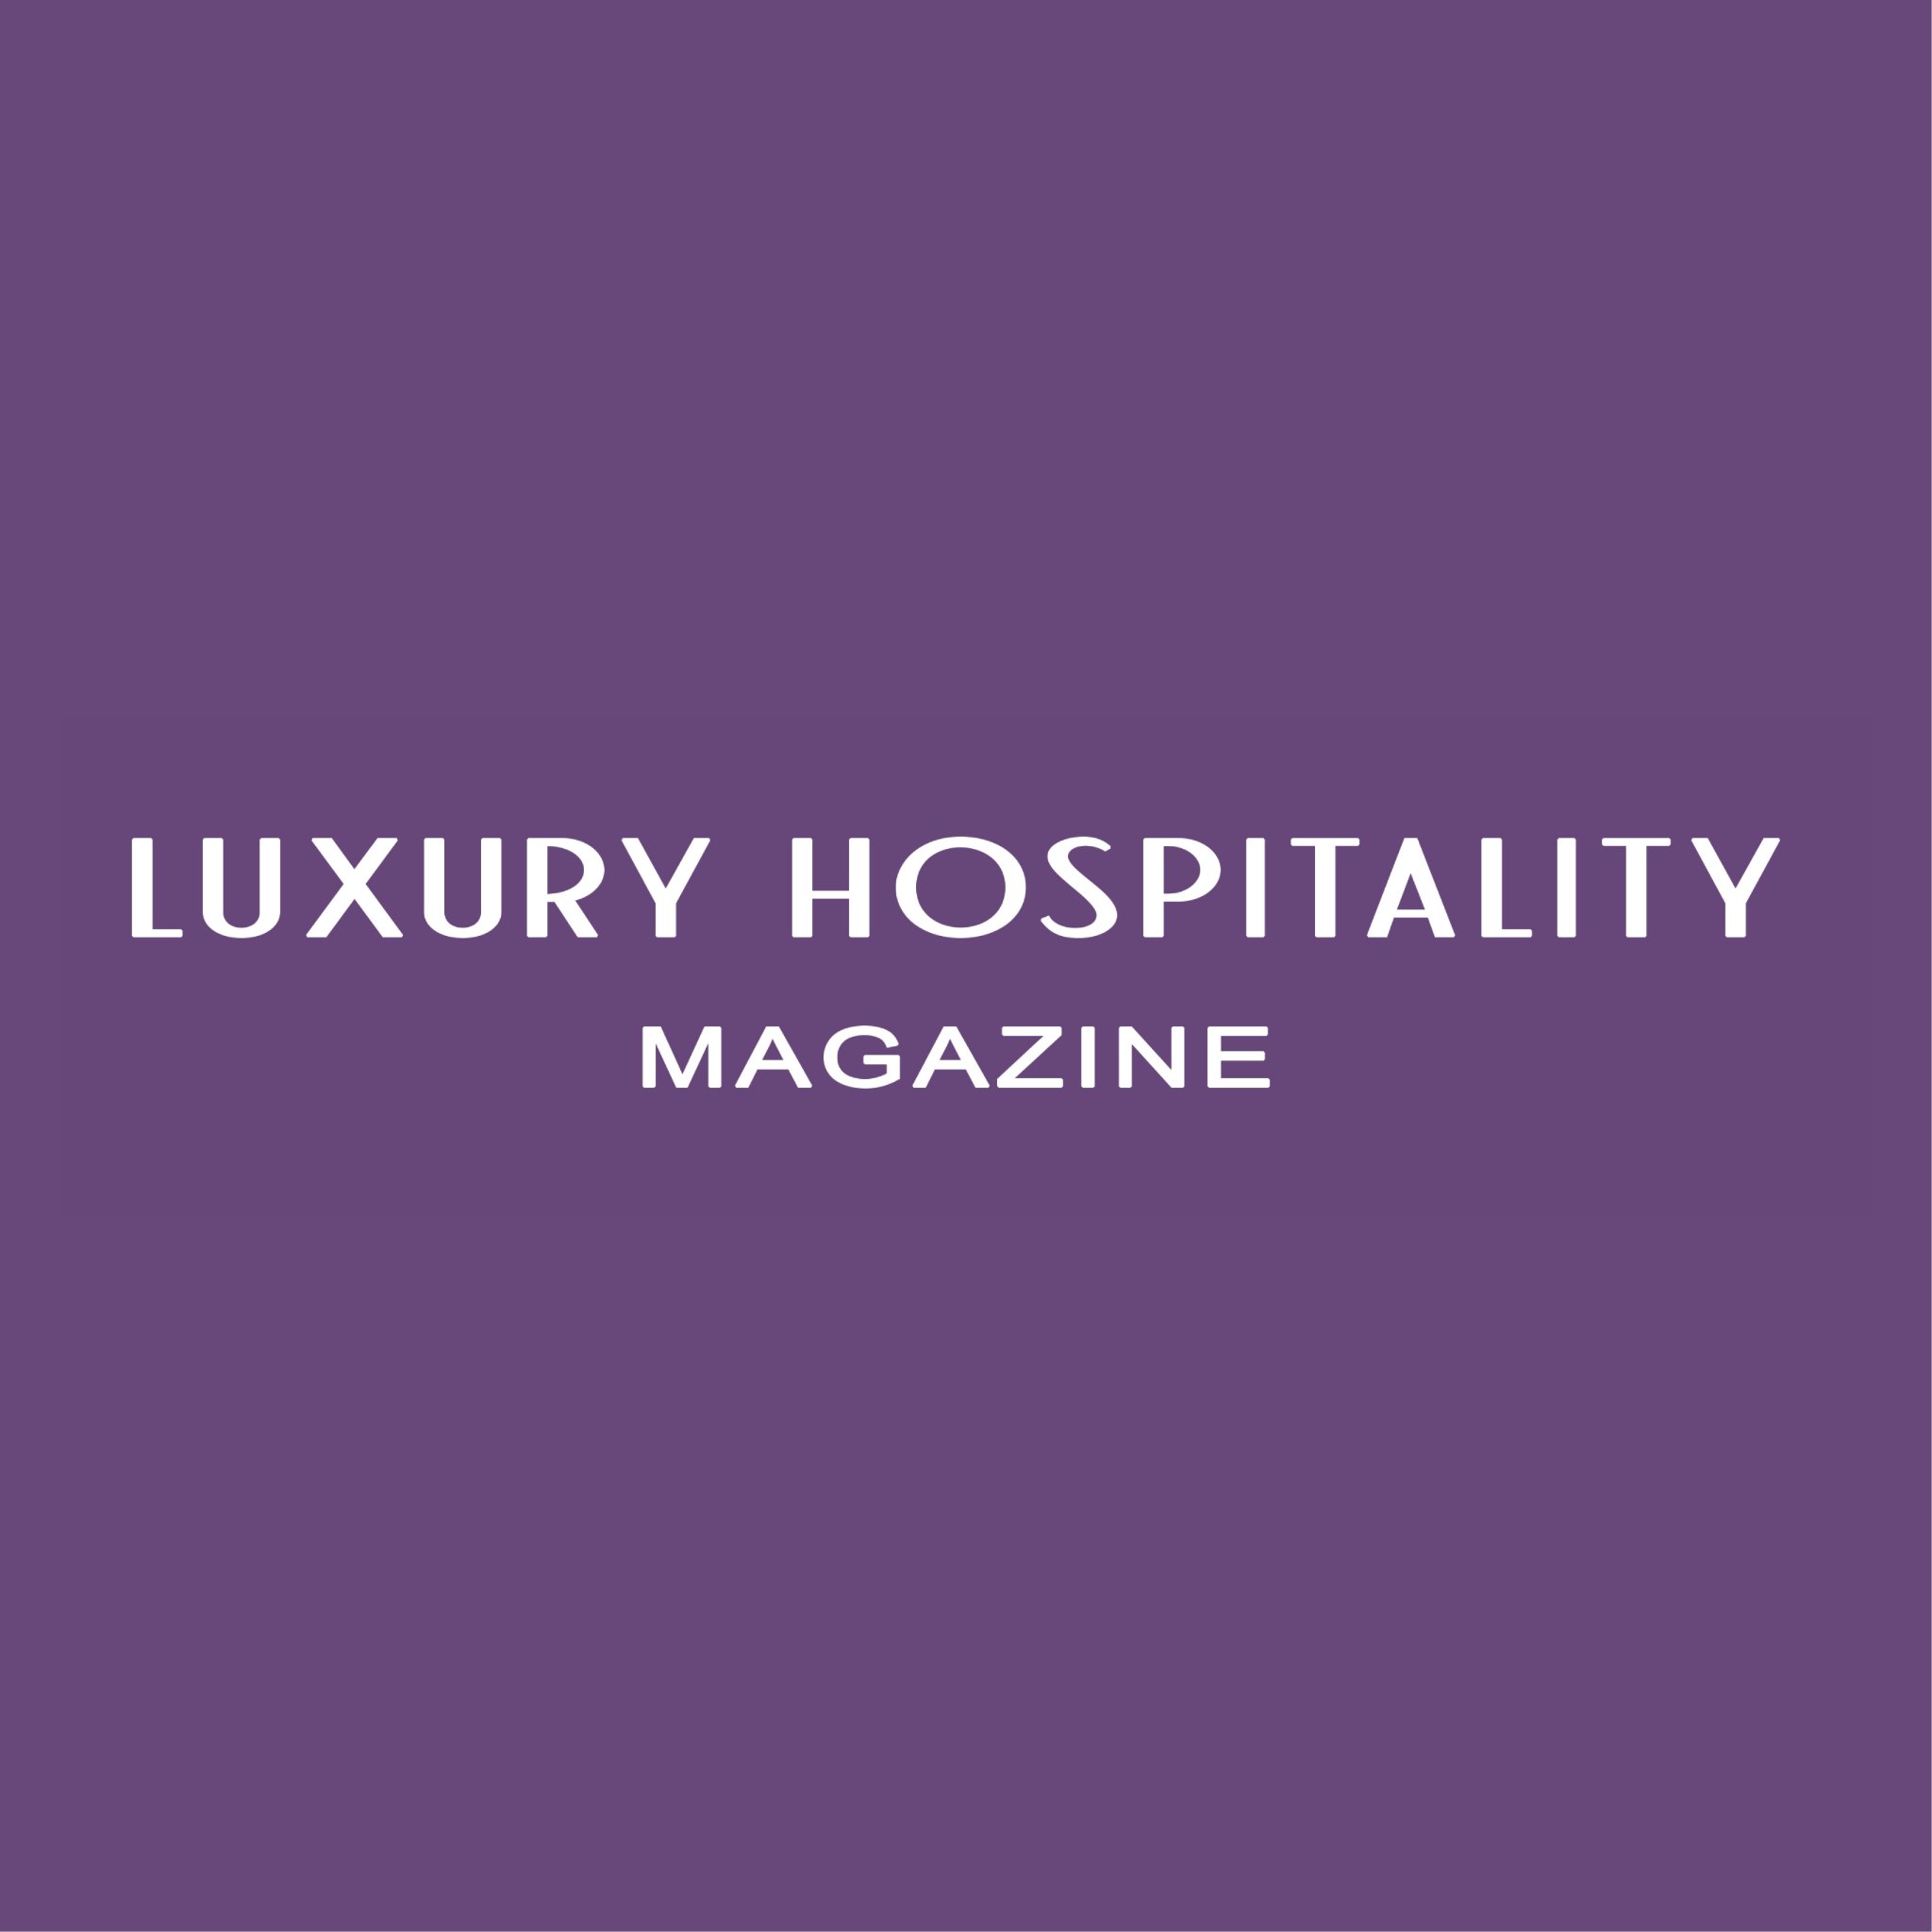 Luxury Hospitality Magazine is a leading trade publication within the hospitality industry. View previous issues of our magazine here: https://t.co/LUBDn5H1d8